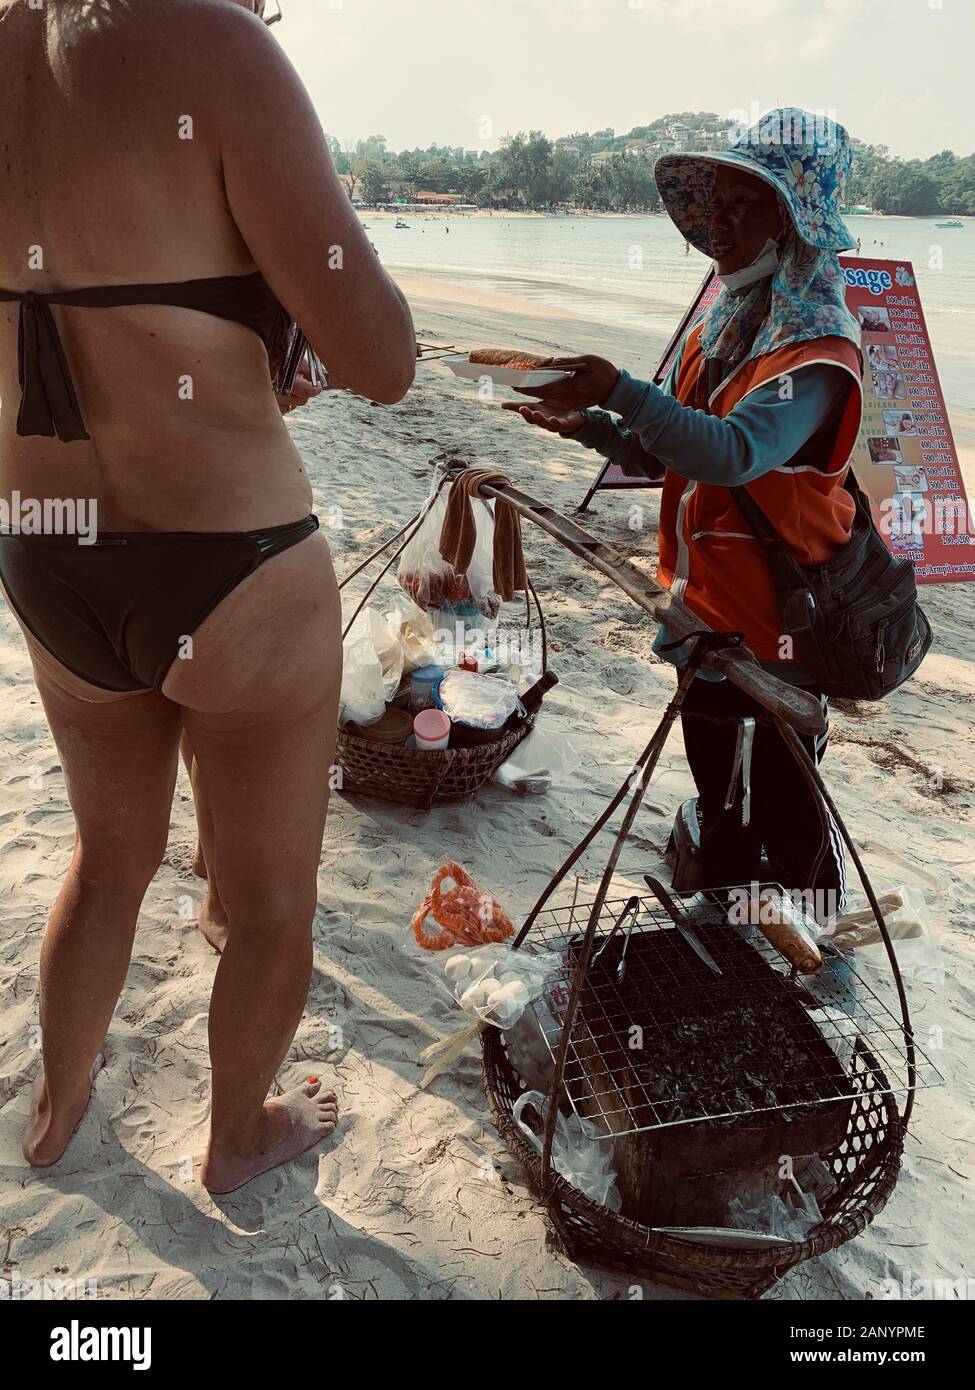 SAMUI, THAILAND - Jan 05, 2020: European tourists in swimwear buying street  food from a local Asian vendor on the Chong Mon beach in Thailand Stock  Photo - Alamy